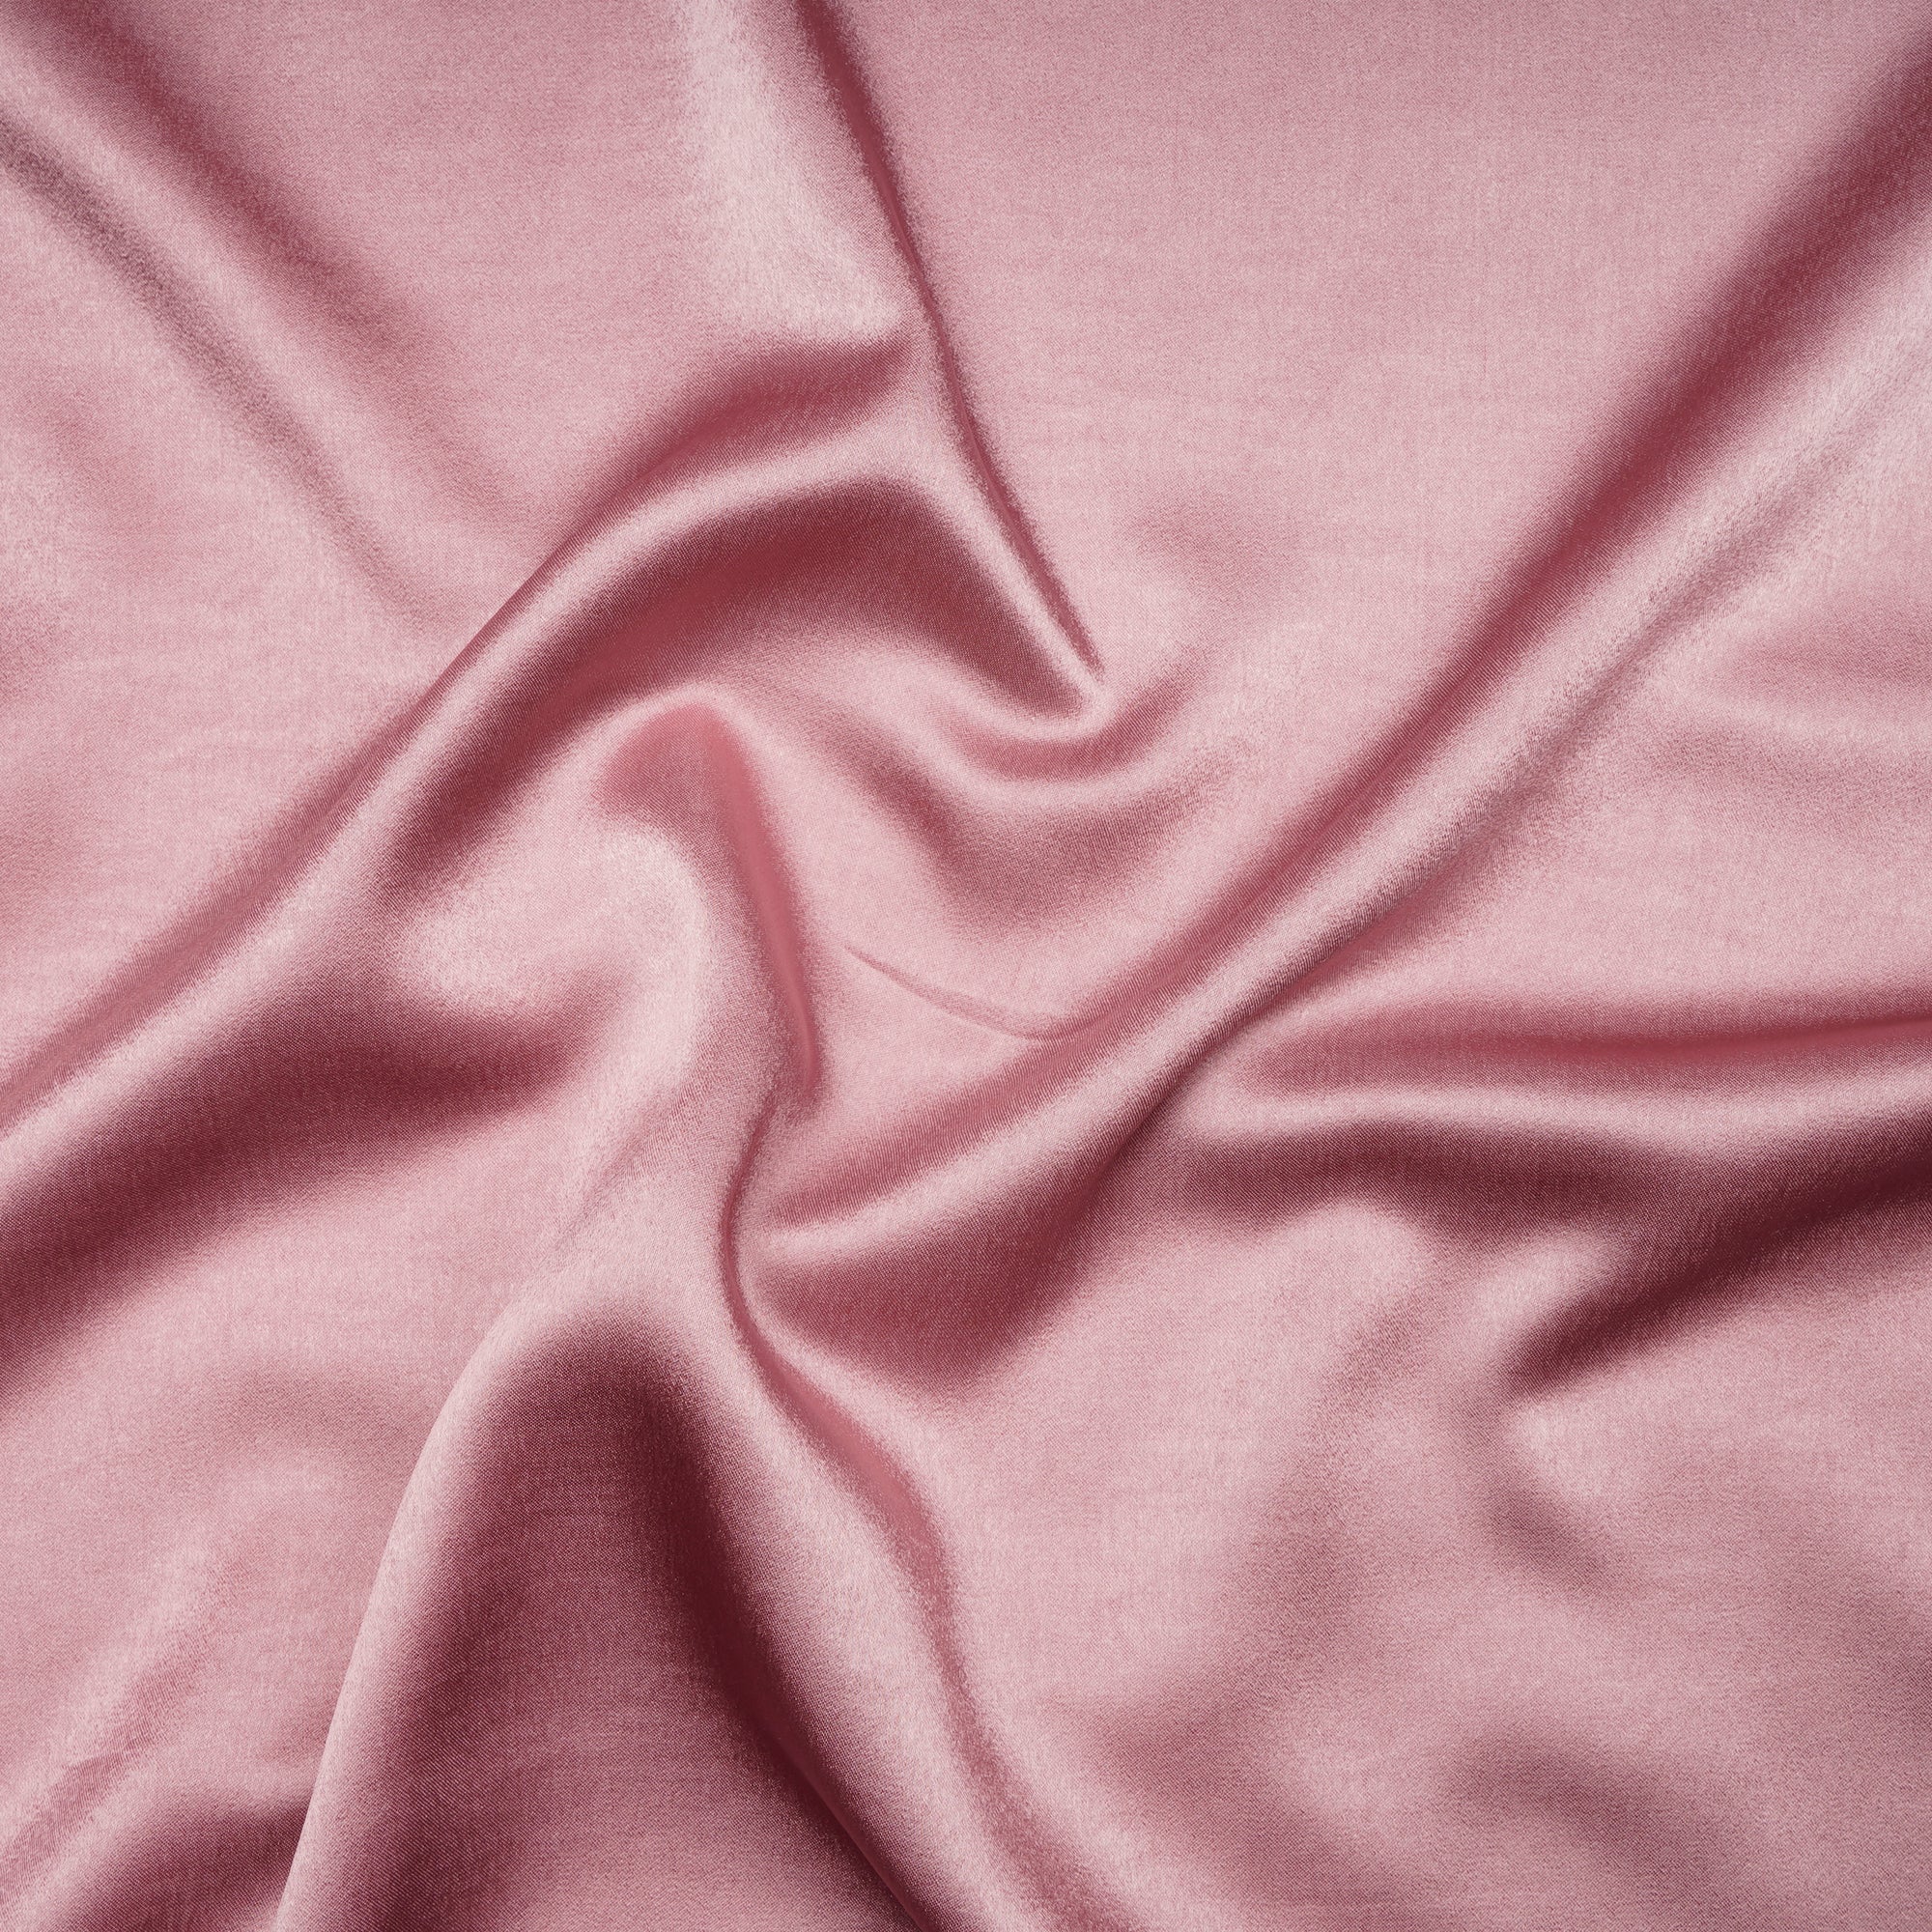 Rose Tan Solid Dyed Imported Milano Satin Fabric (60" Width)